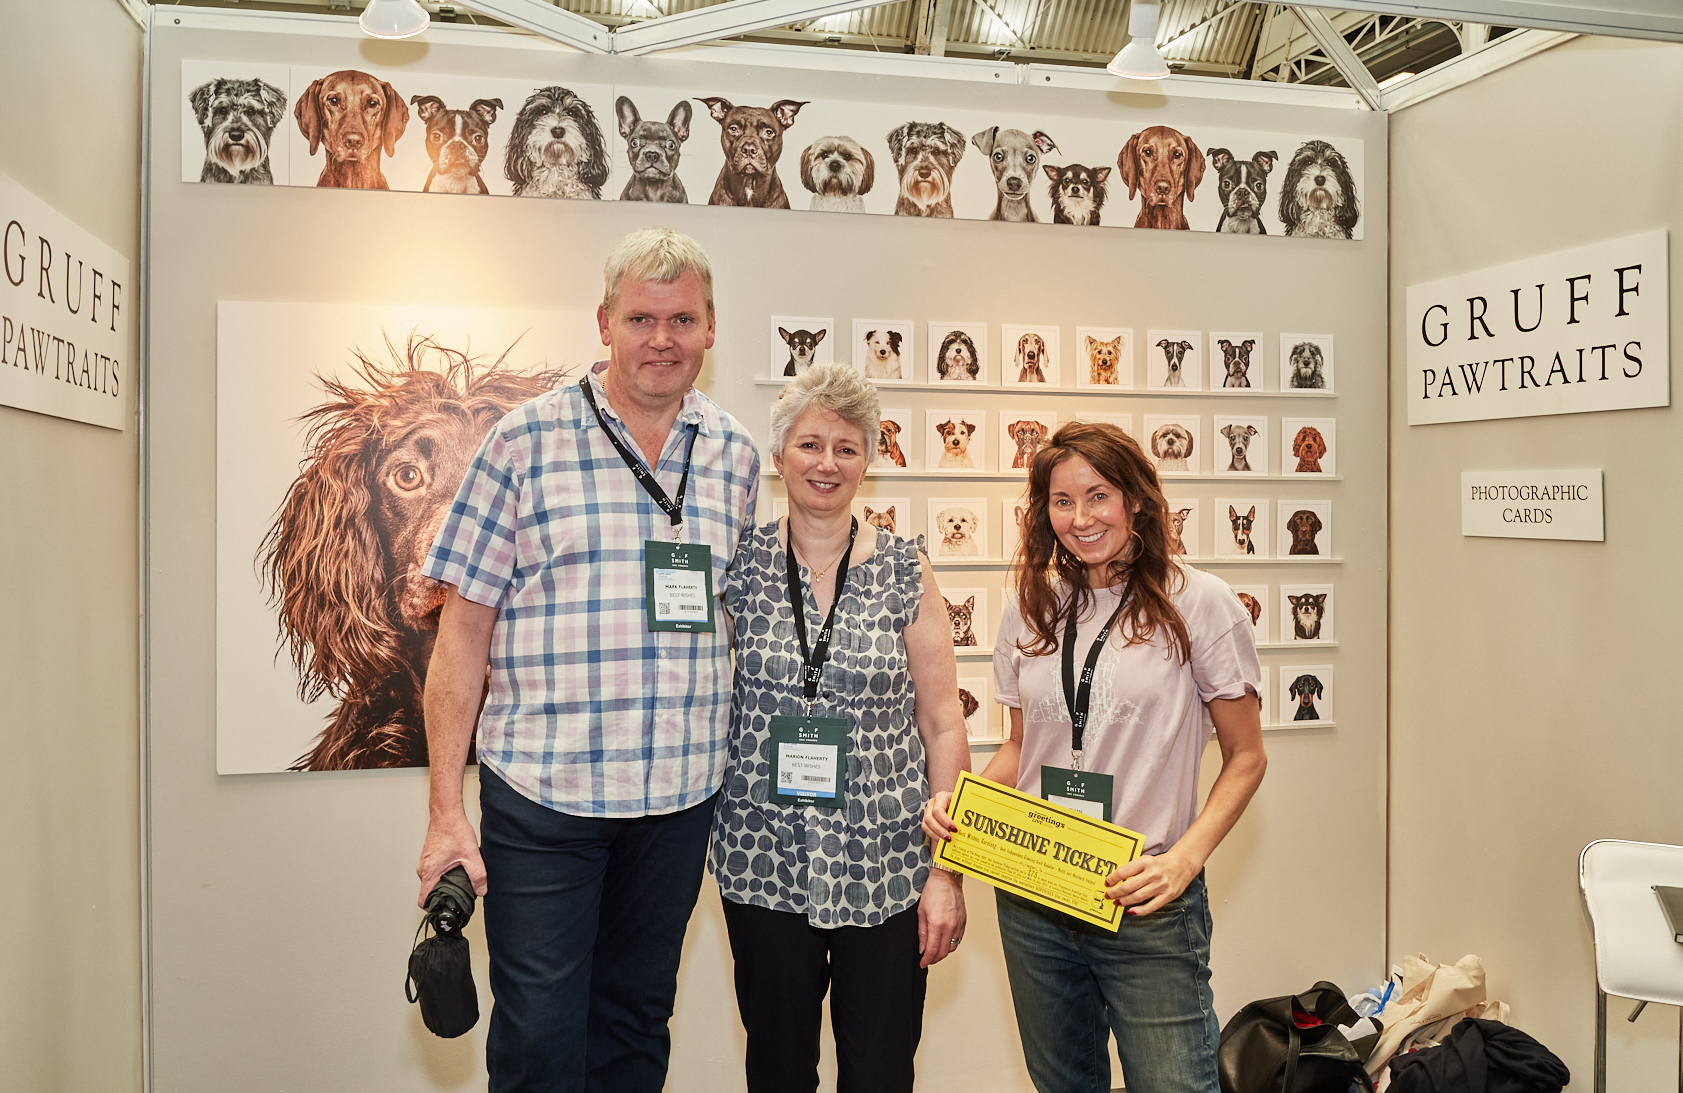 Above: Best Wishes’ Mark and Marion Flaherty spent their Sunshine Ticket with Gruff Pawtraits at PG Live 2021, Rhian (right) was delighted.